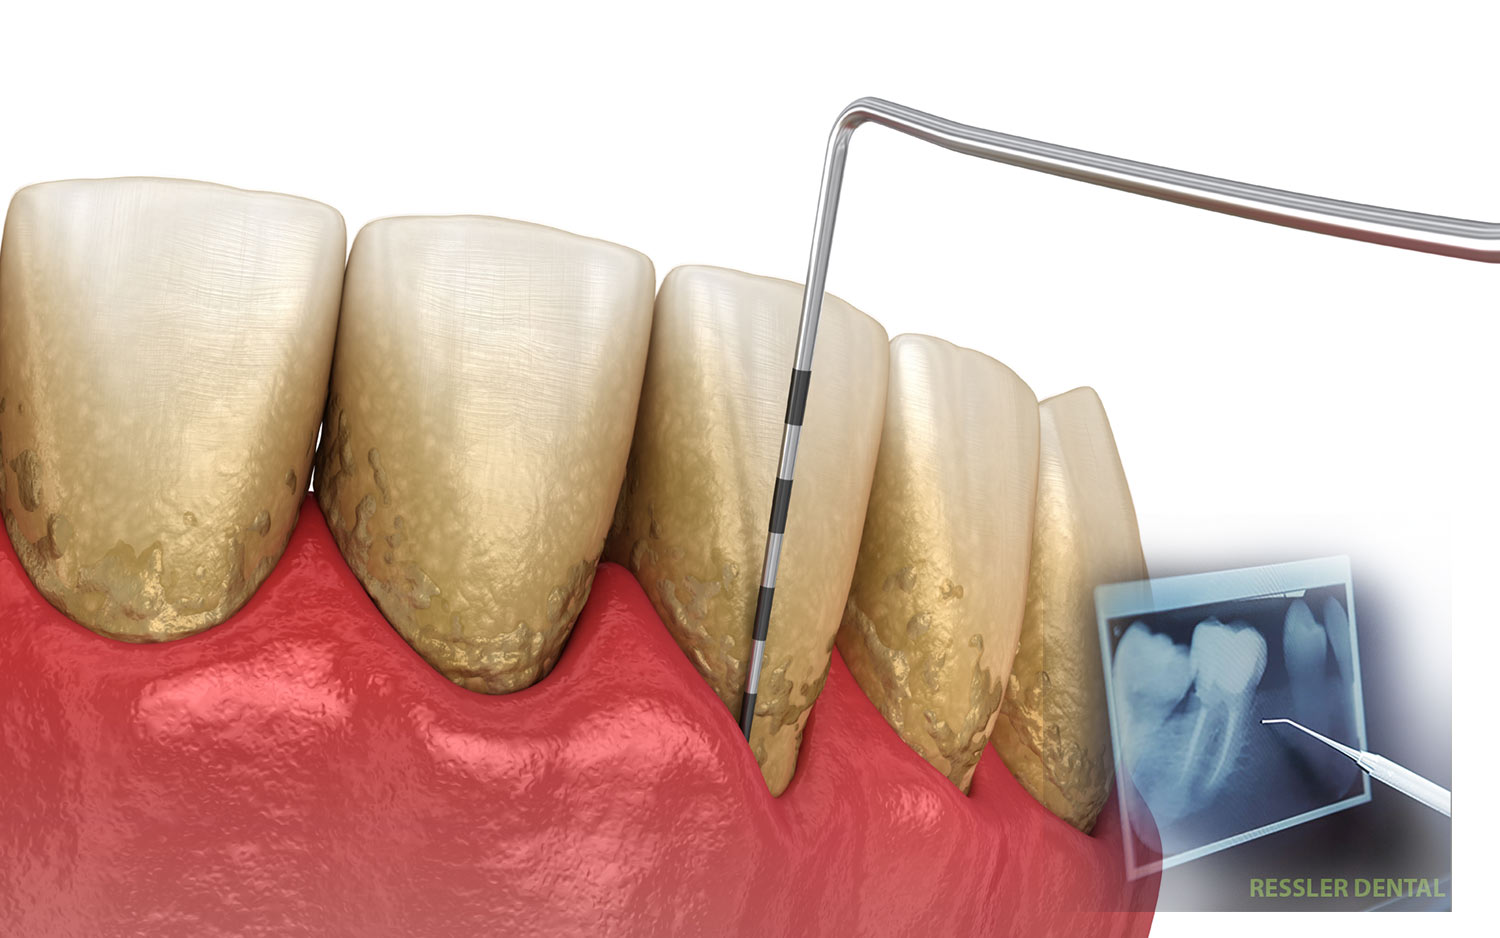 diagnosis for gum disease and periodontal laser therapy